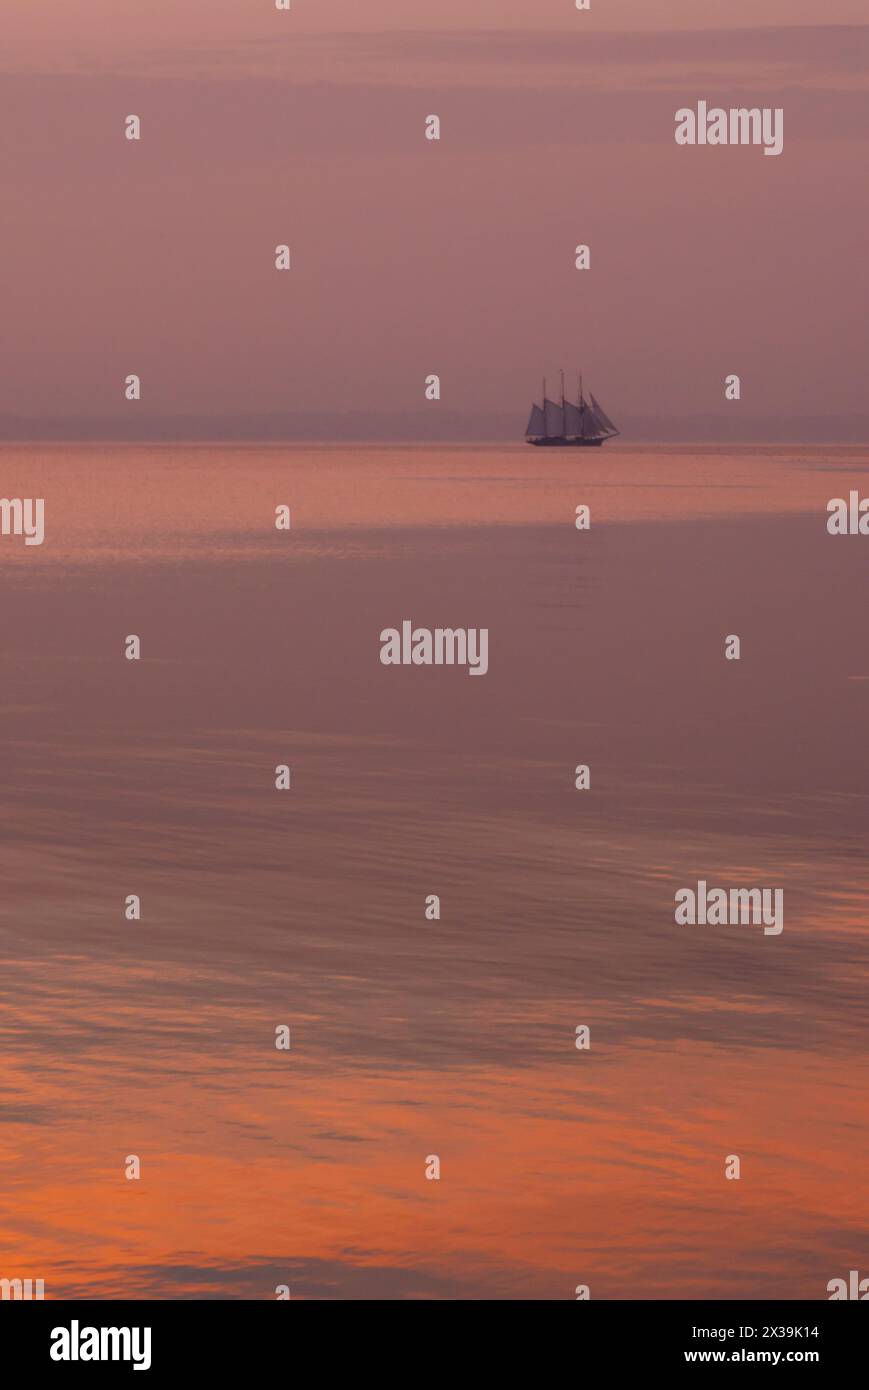 A lonely full rigged ship passing in peach morning light Stock Photo